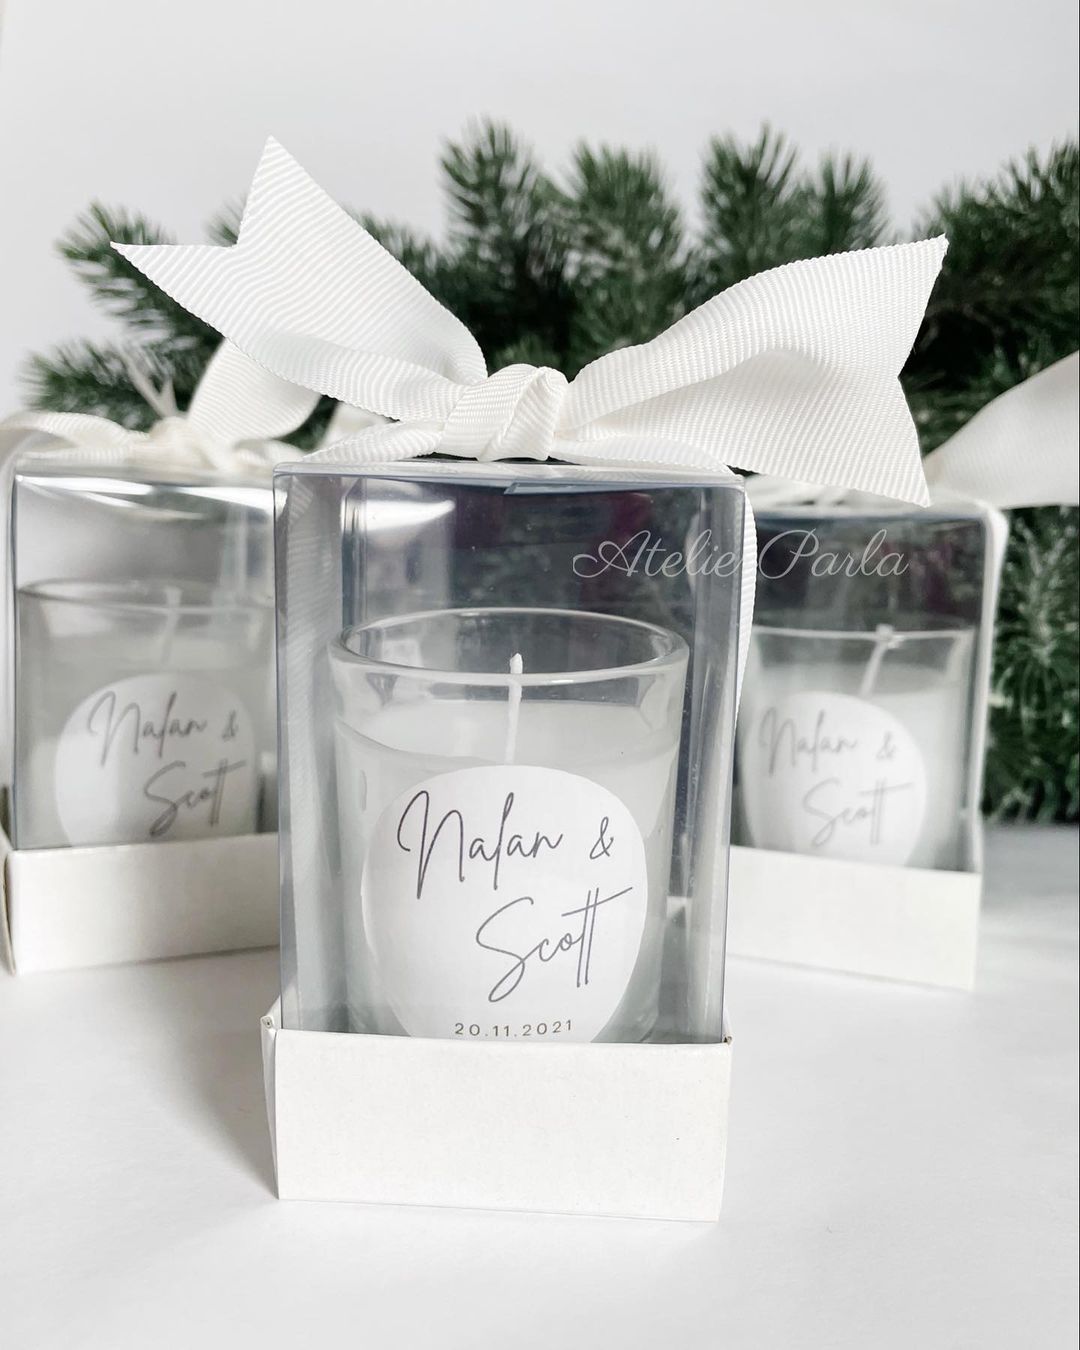 Top 10 Inspirational & Quirky Ideas for Winter Wedding Favors -   Blog